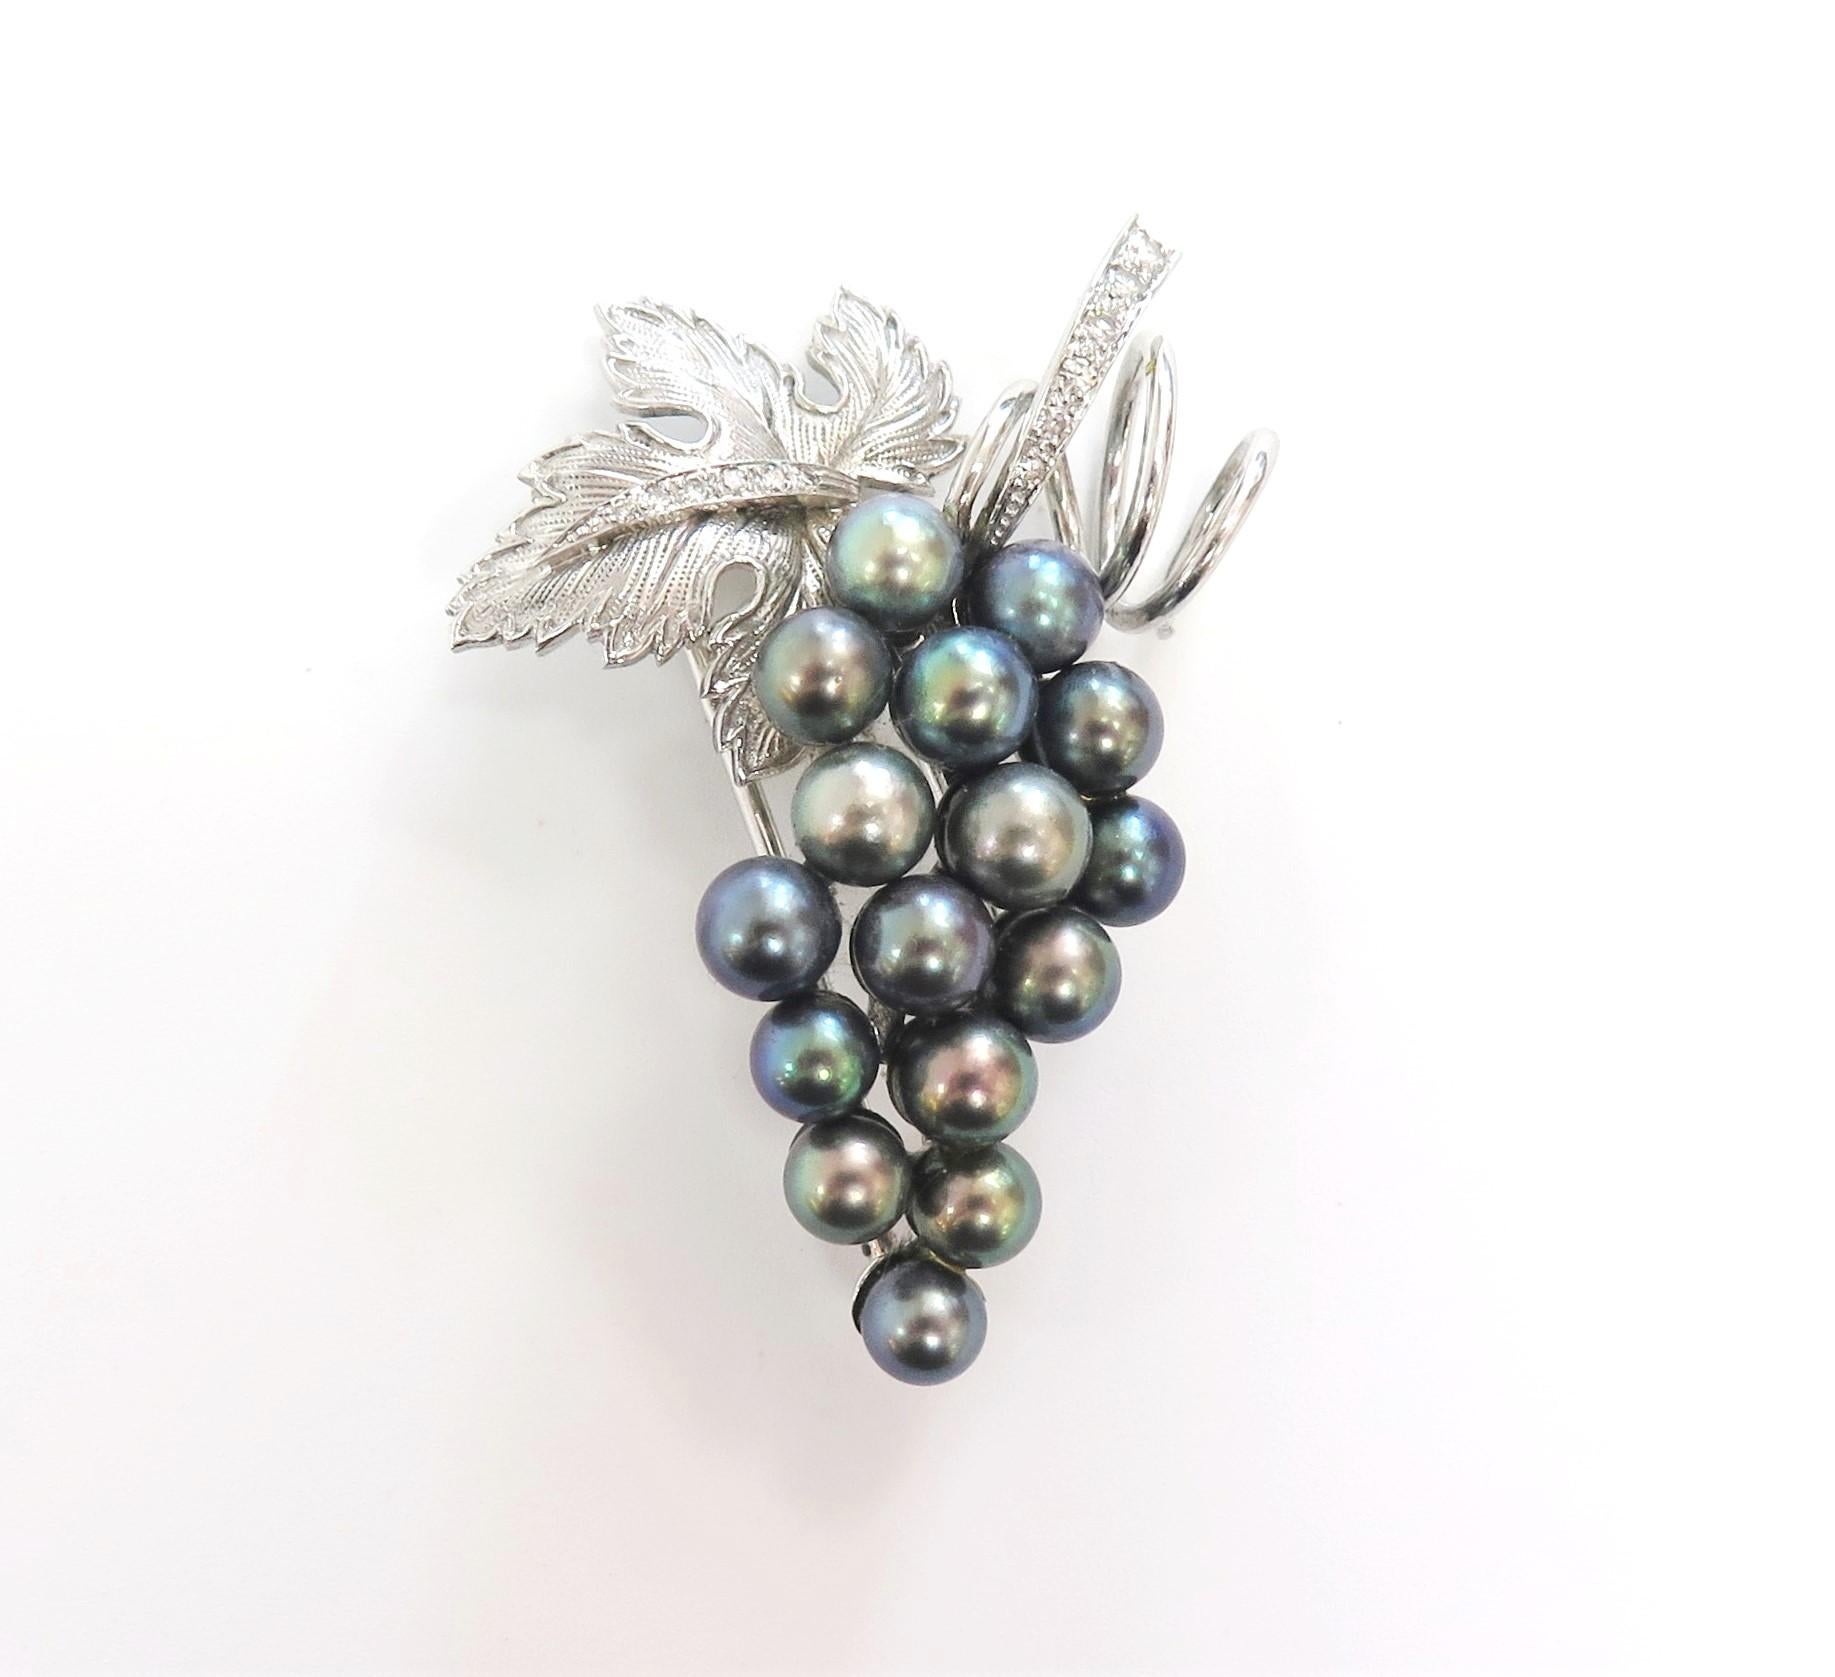 Boucheron, the first jeweler of the Place Vendome, creator of fine jewelry, high-end jewelry, and luxury watches is based in Paris.

This beautifully made black cultured pearl brooch (double pin / fur clip) is crafted in 14 karat white gold. The